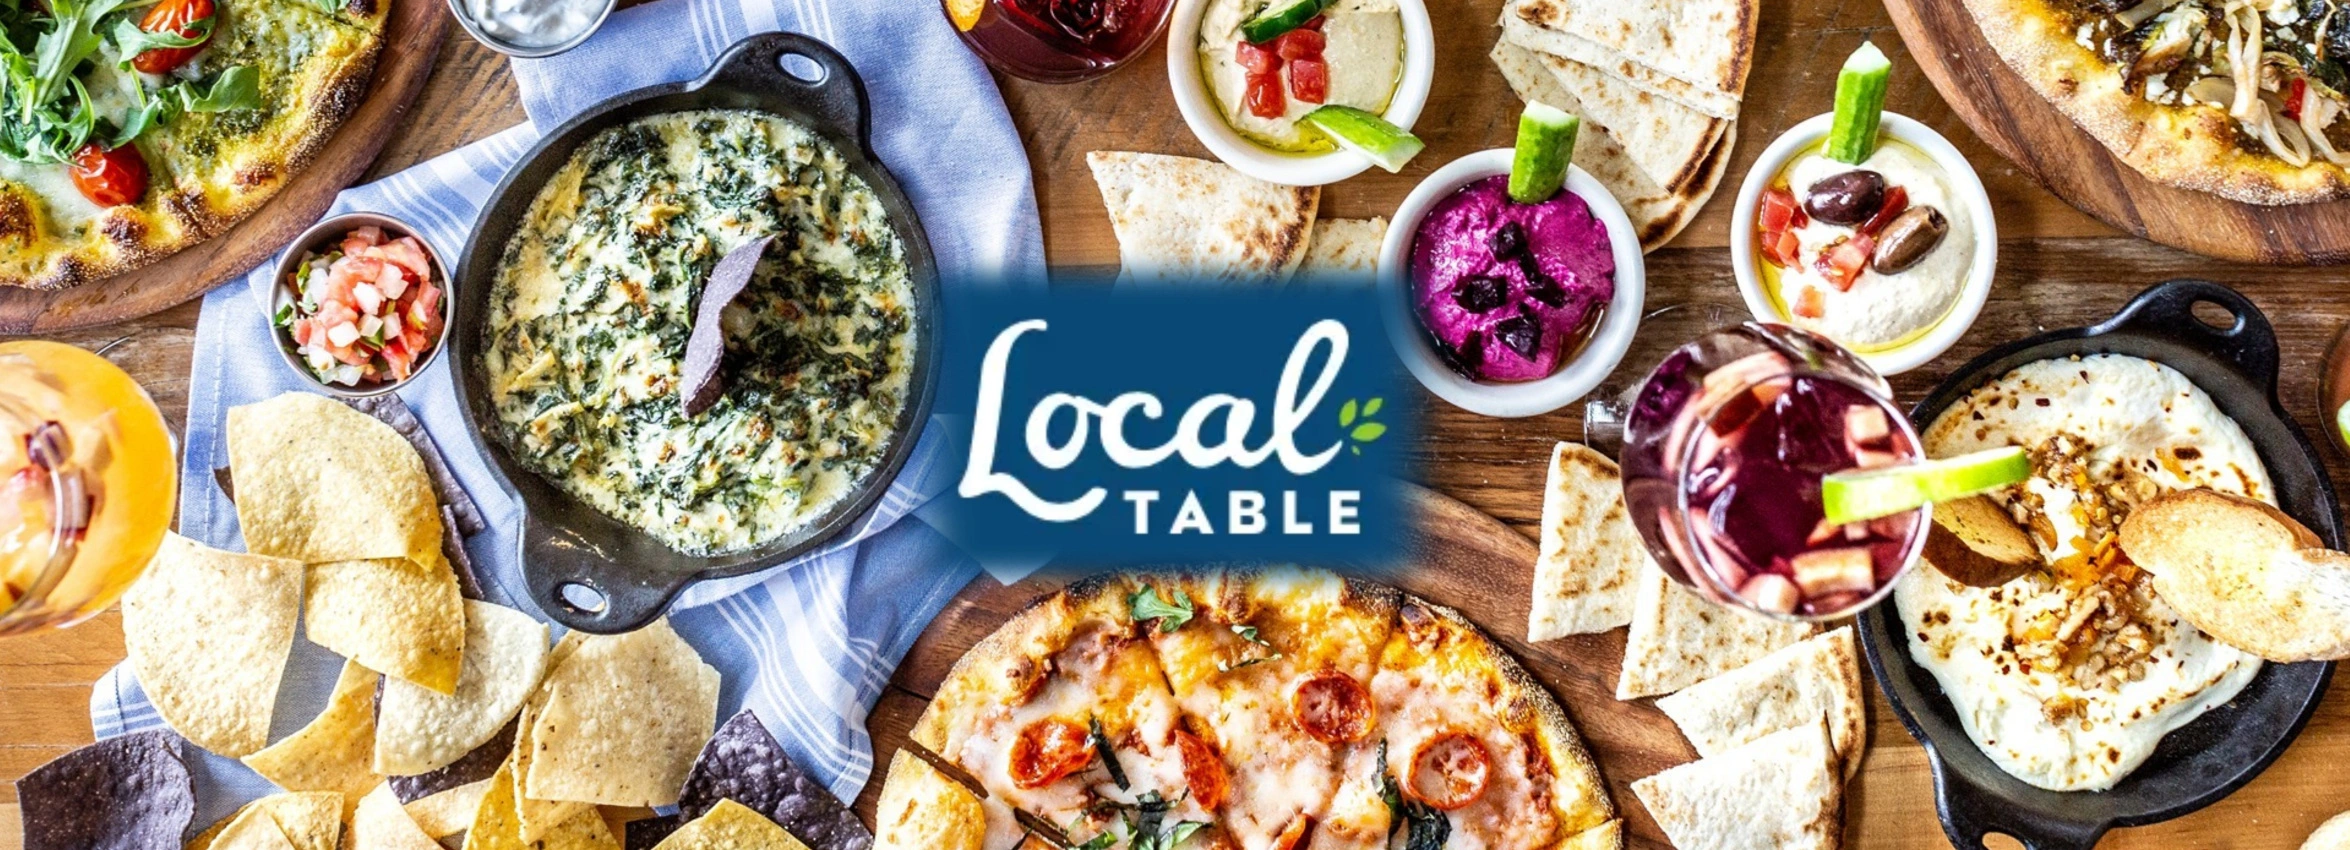 Local-Table